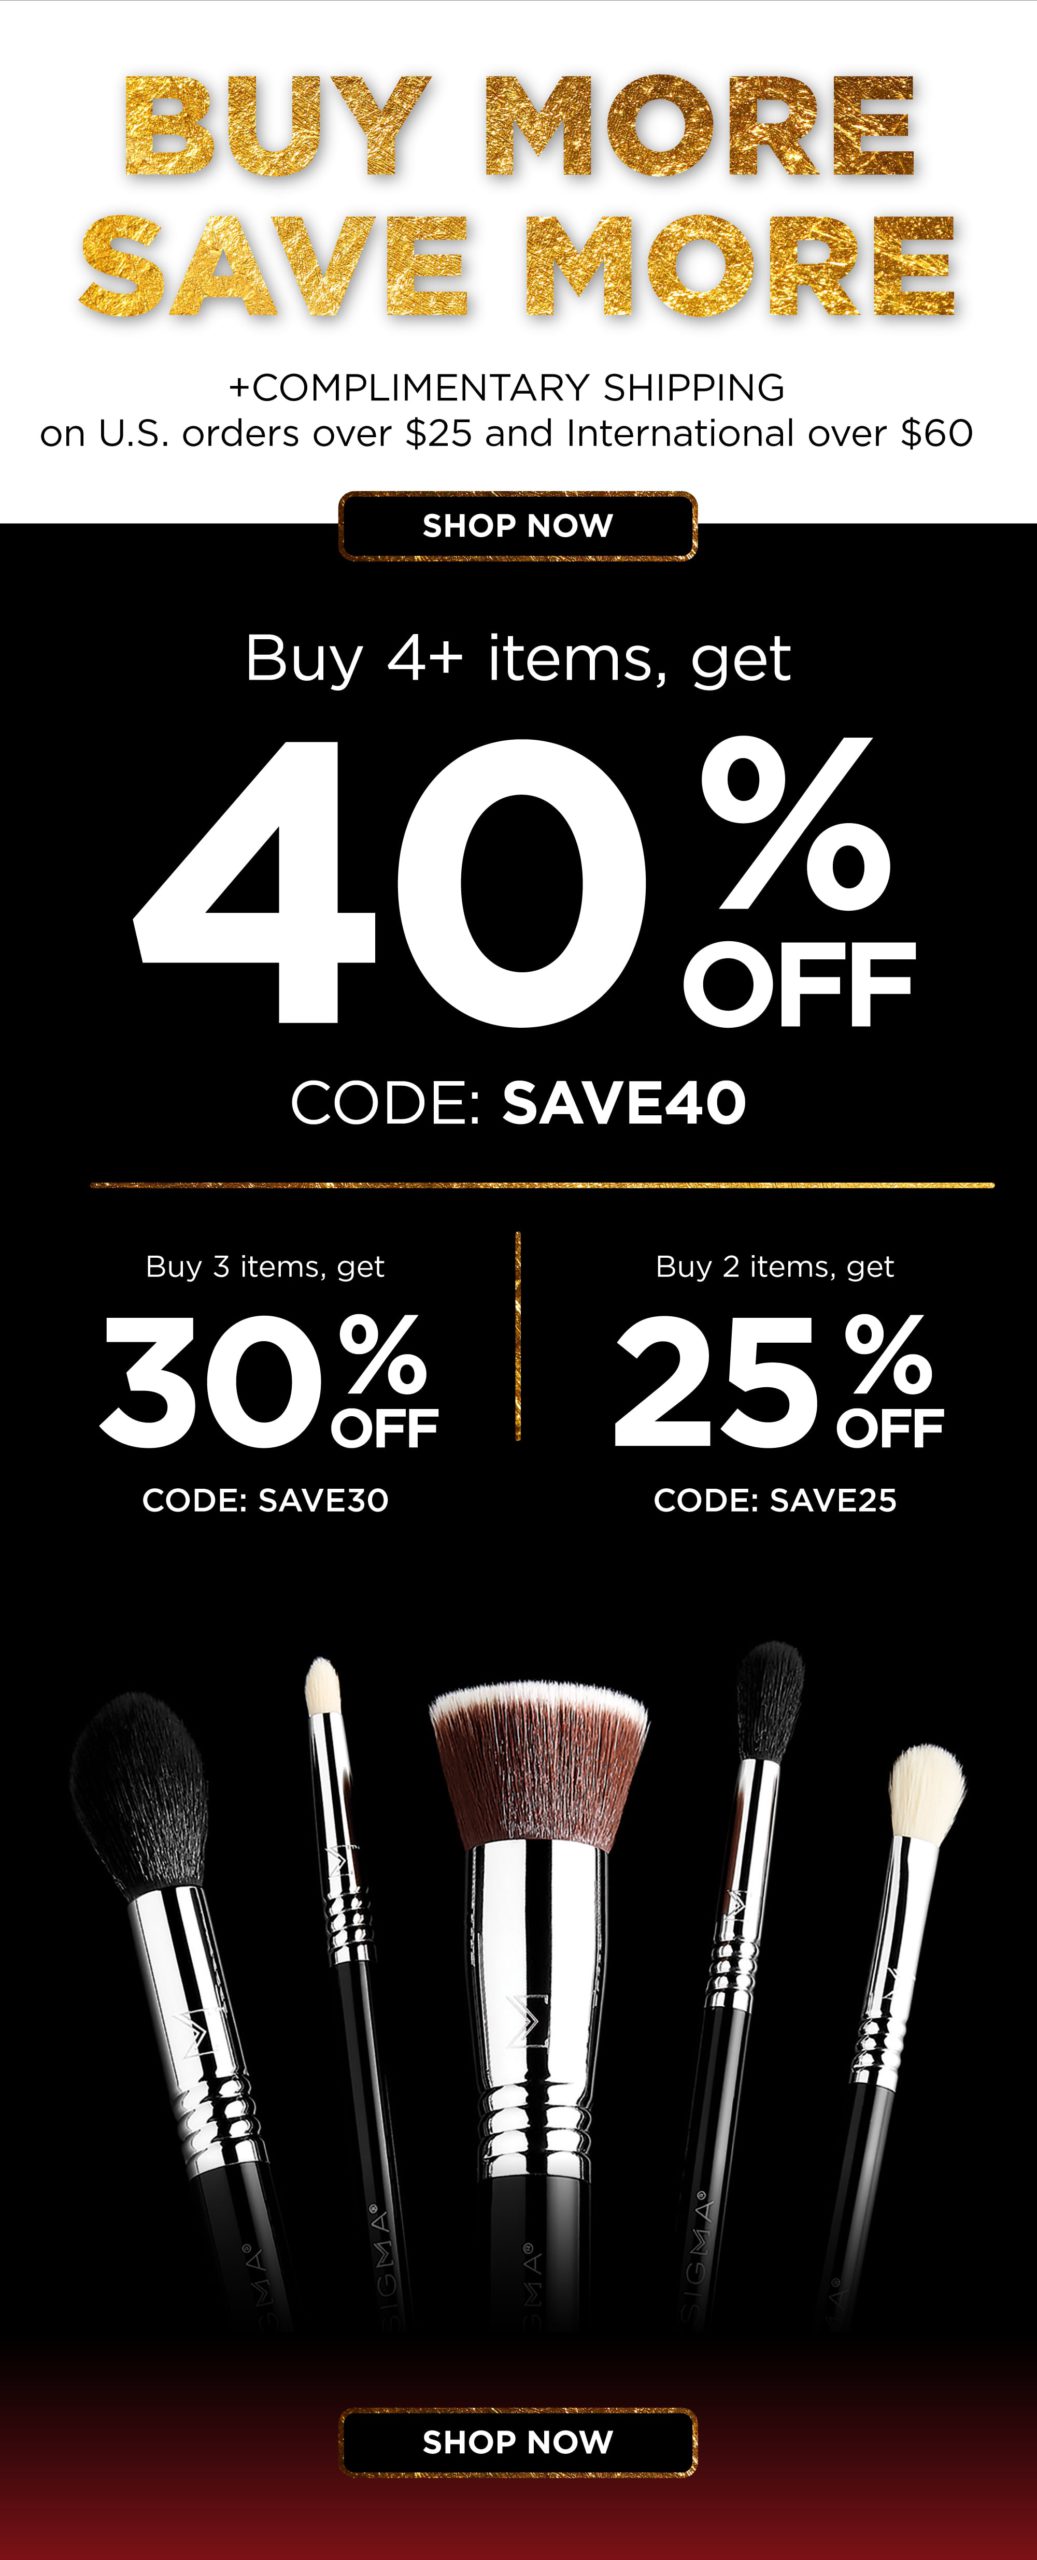 Buy More Save More | 40% off 4 or more items, 30% off 3 items, and 25% off 2 items. Use codes SAVE40, SAVE30, or SAVE25.